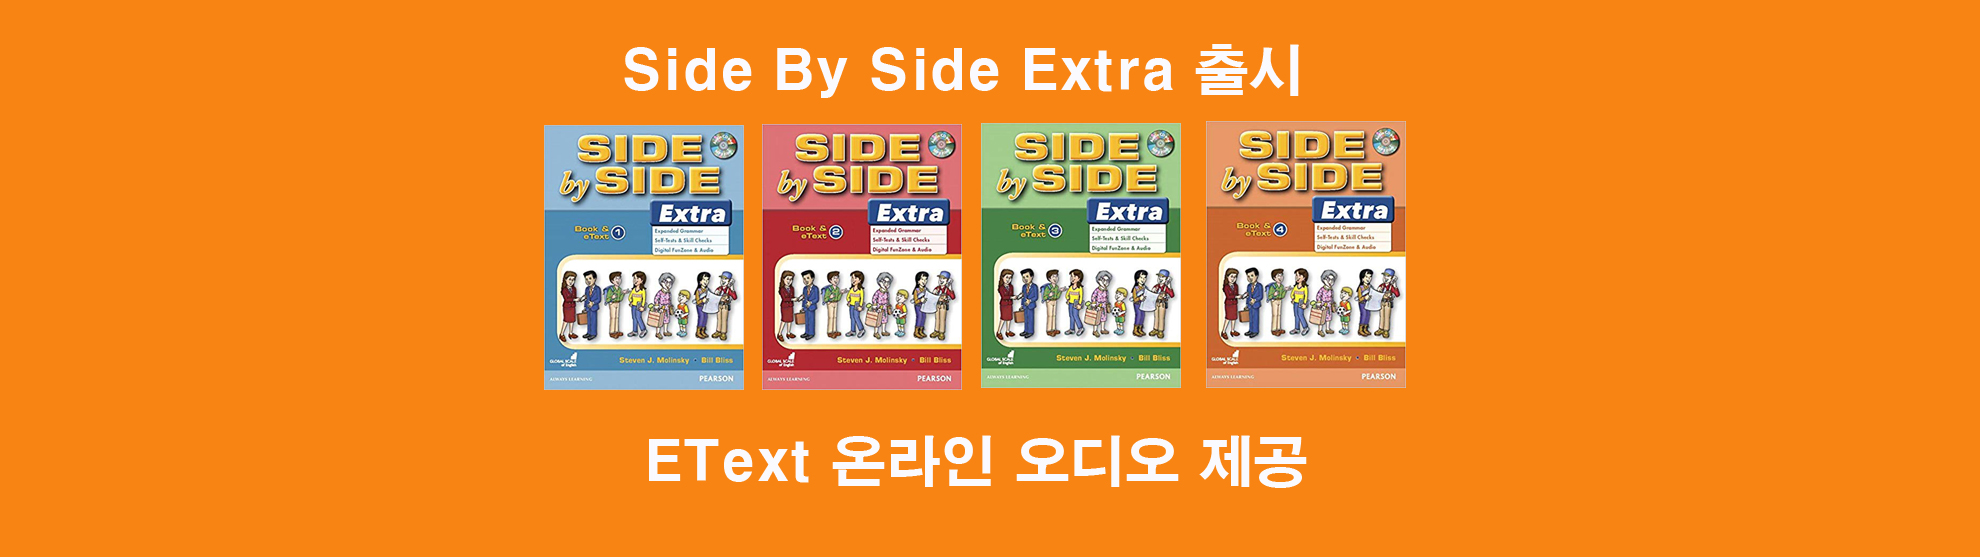 Side By Side Extra